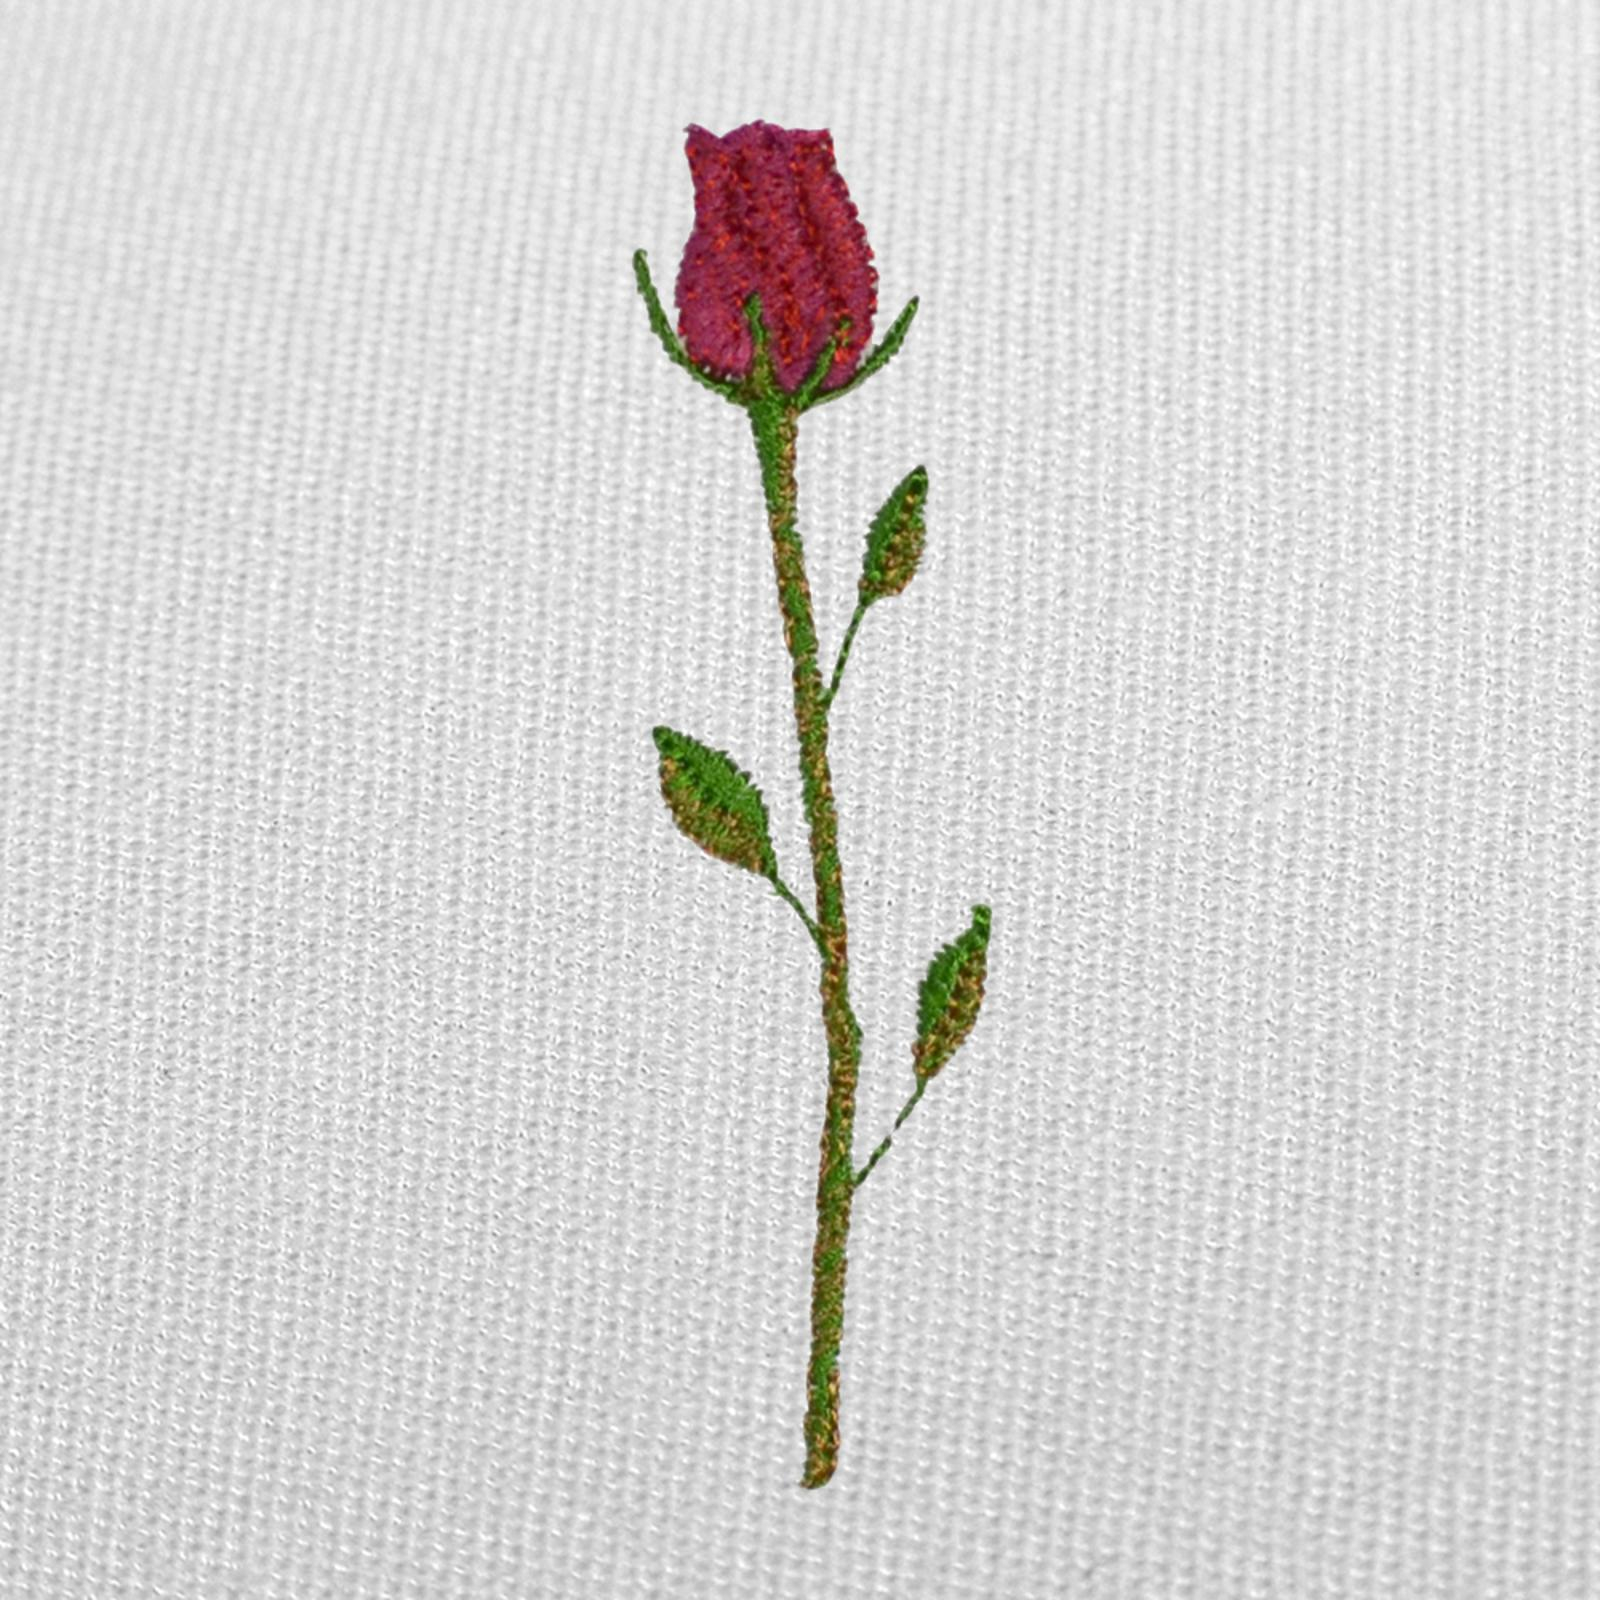 Free Machine Embroidery Patterns To Download Free Machine Embroidery Designs